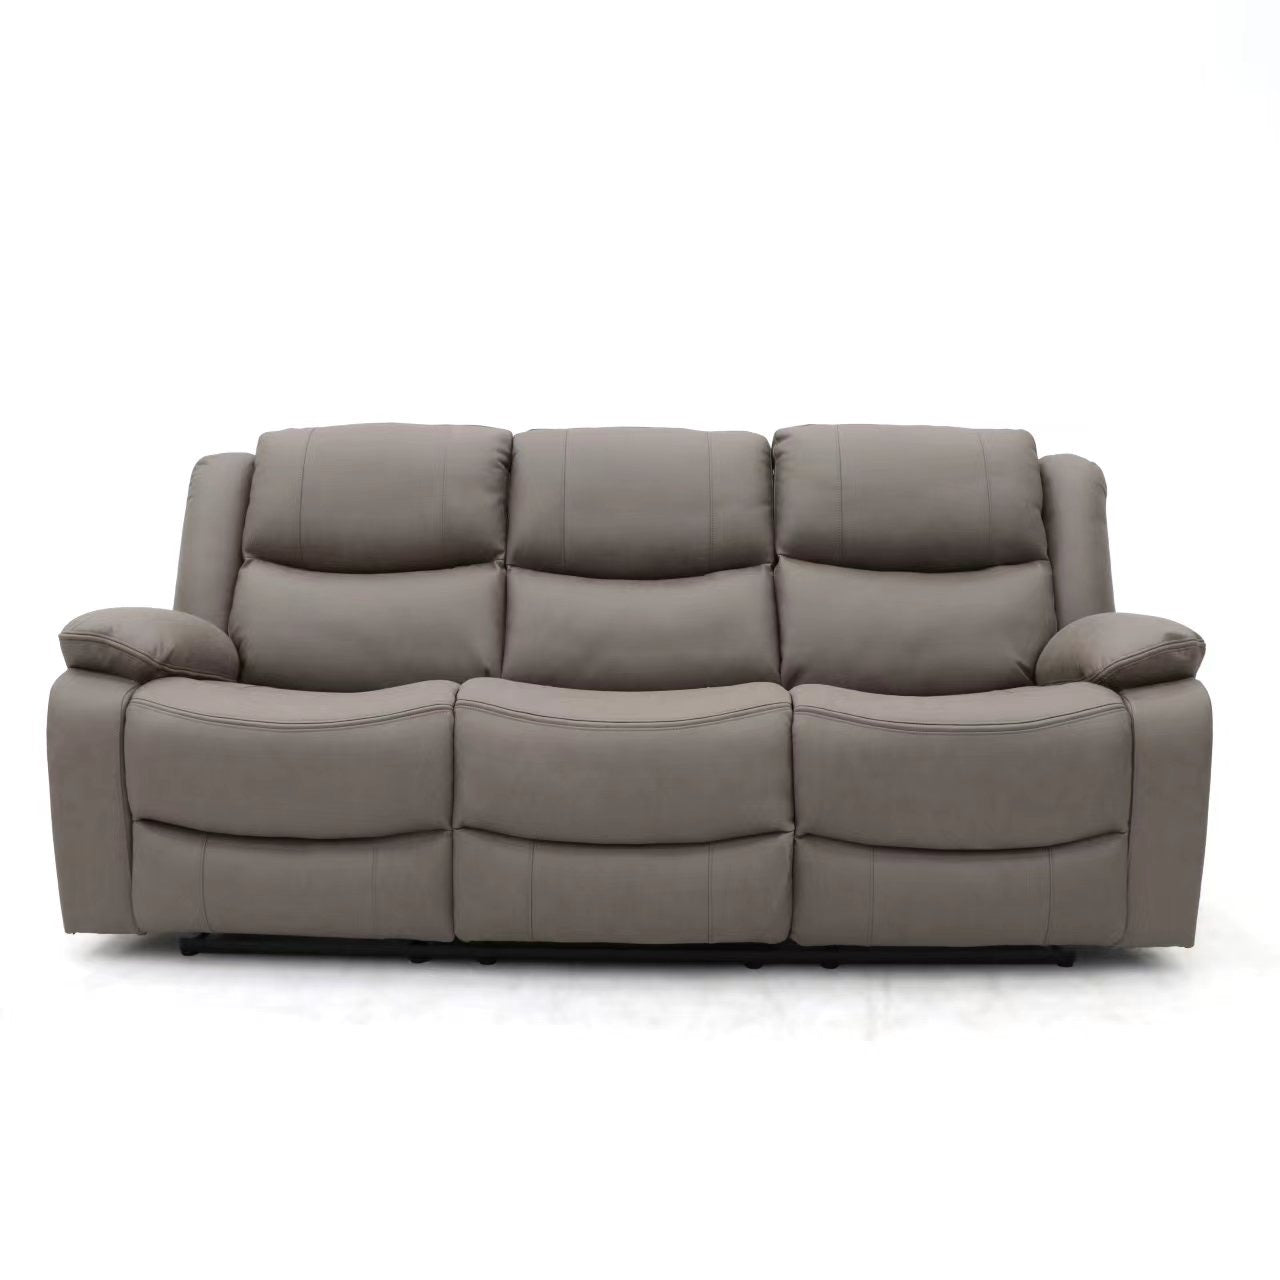 Zoe 3 Seater and 2 Seater Manual Recliner Mink Fabric